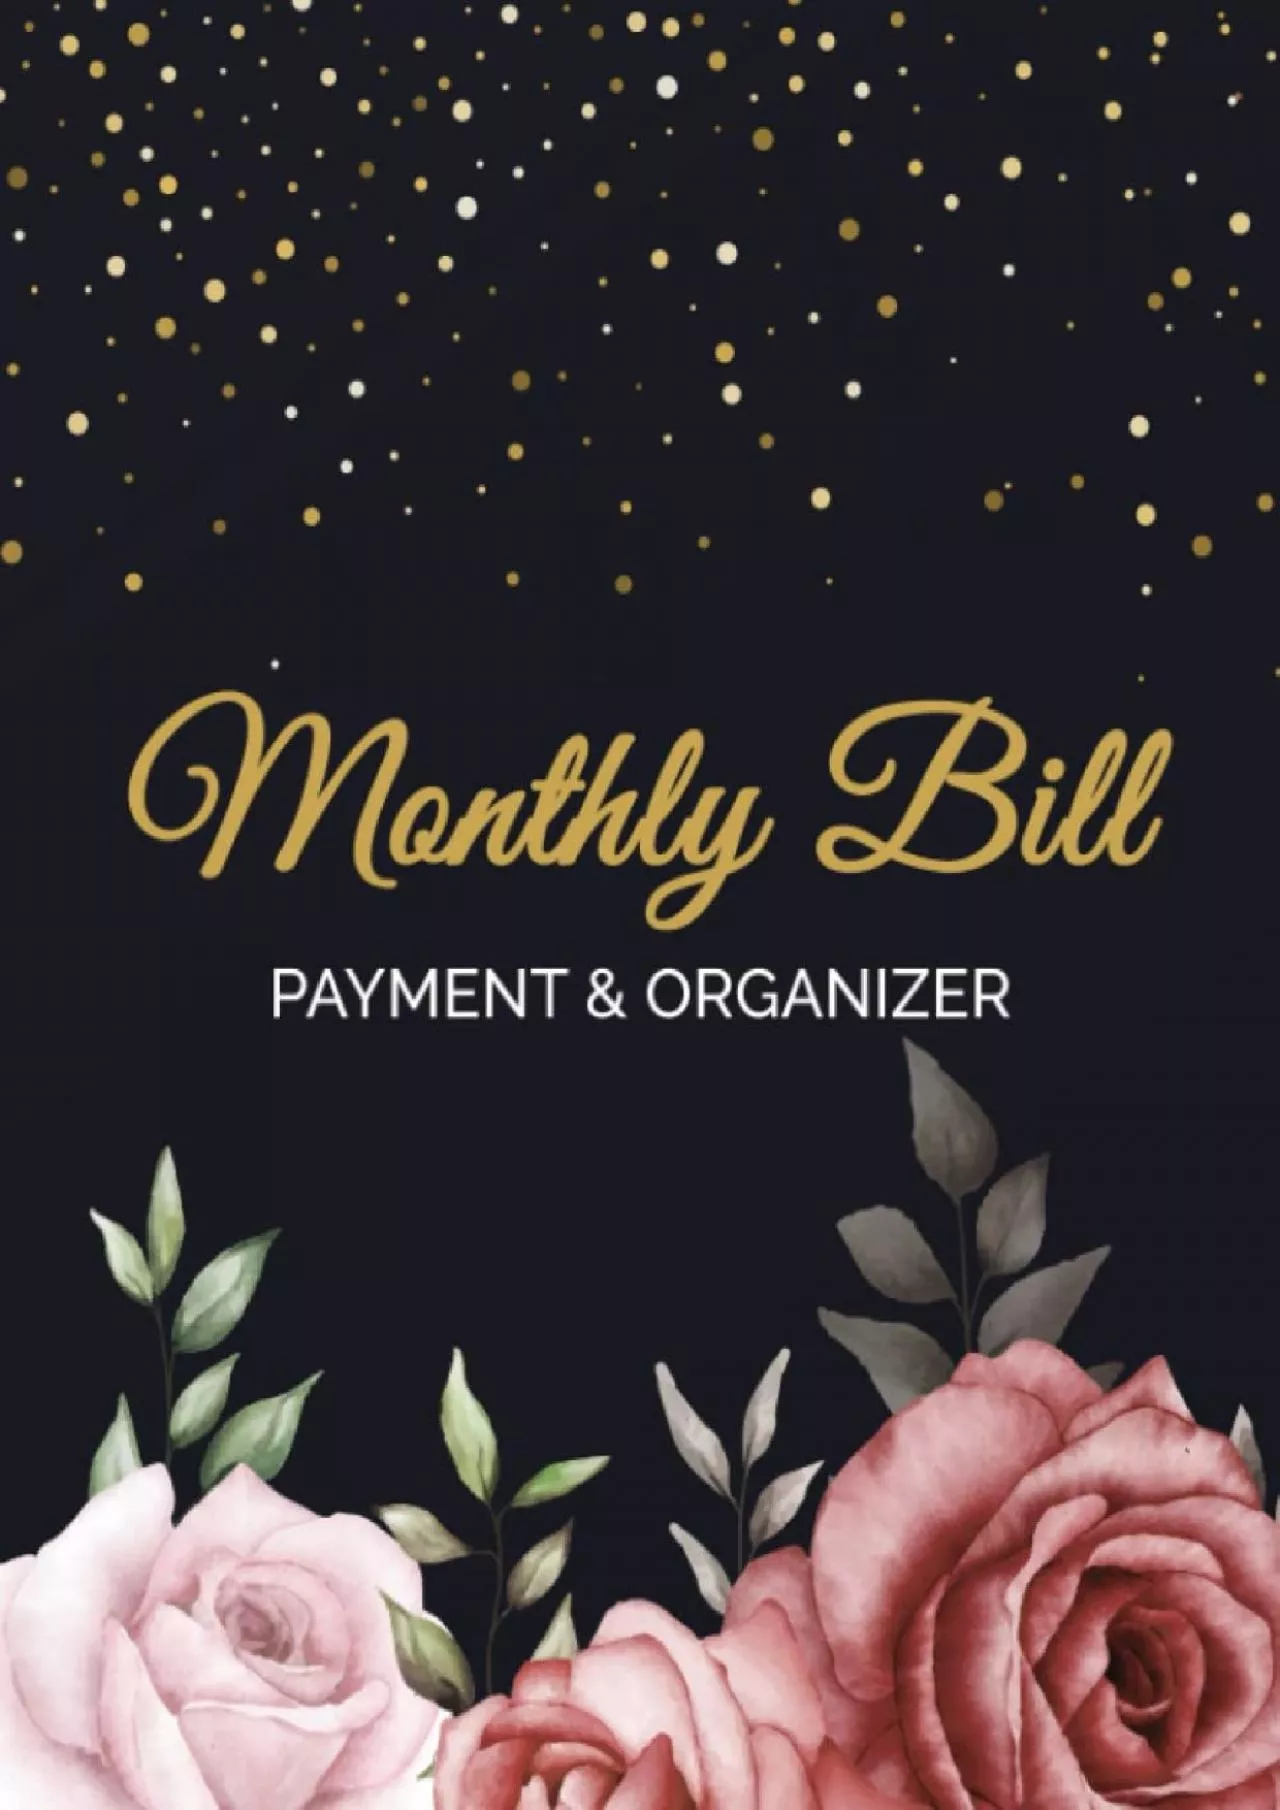 Bill Payment Organizer: Bill and Expense Tracker | Monthly Bill Payment & Organizer |